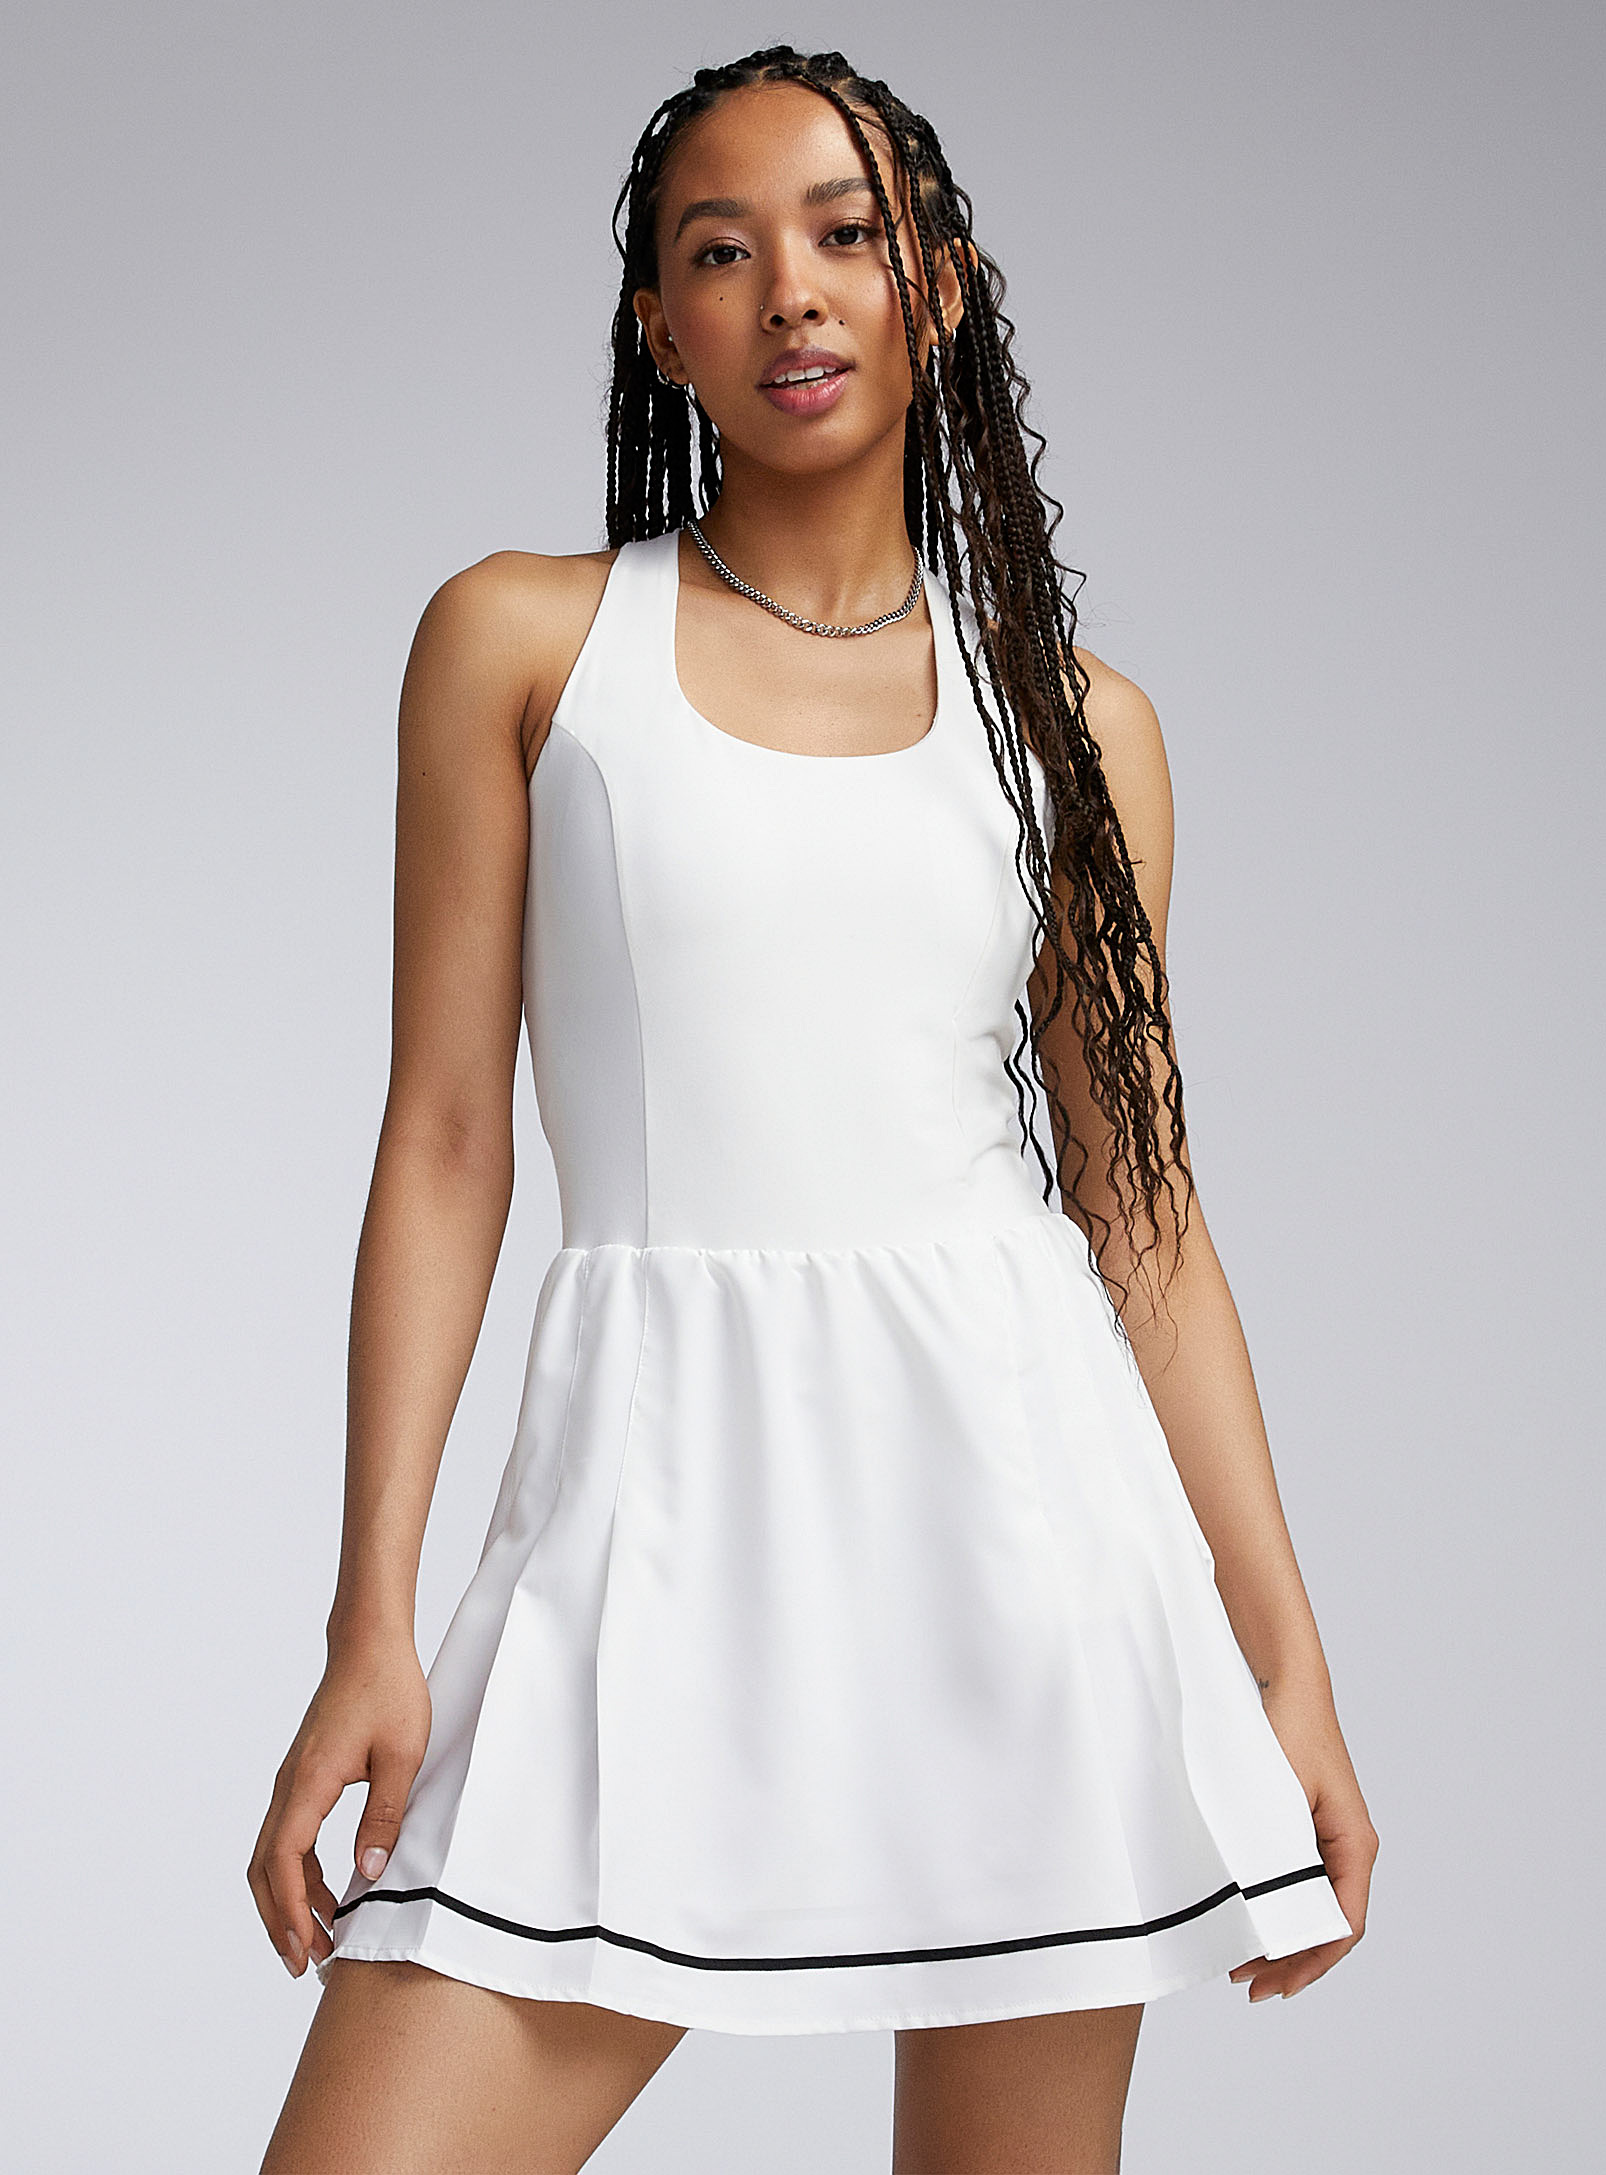 Twik Contrasting Band Tennis Dress In White